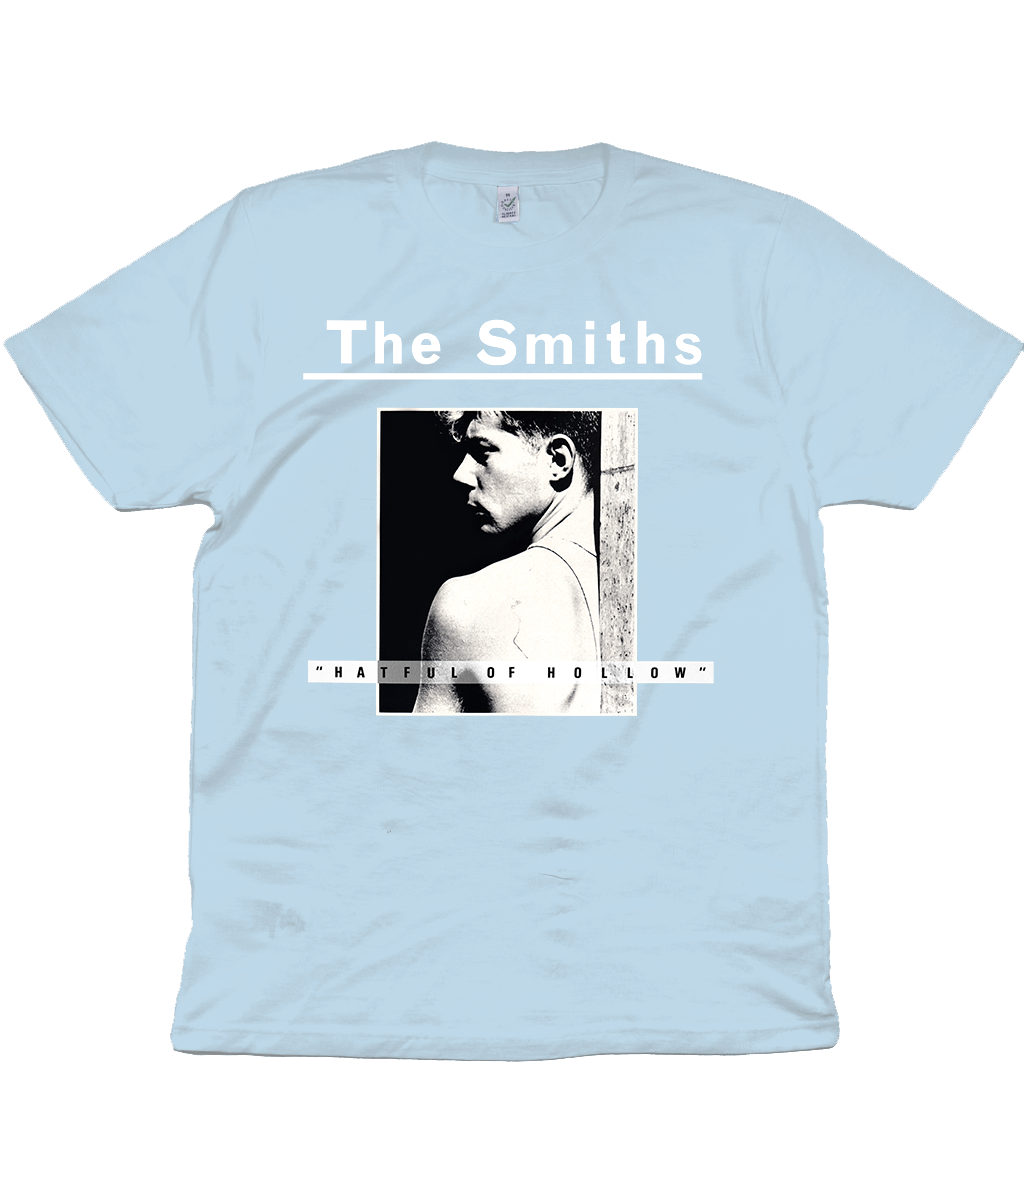 The Smiths - Hatful Of Hollow - 1984 - Back Print